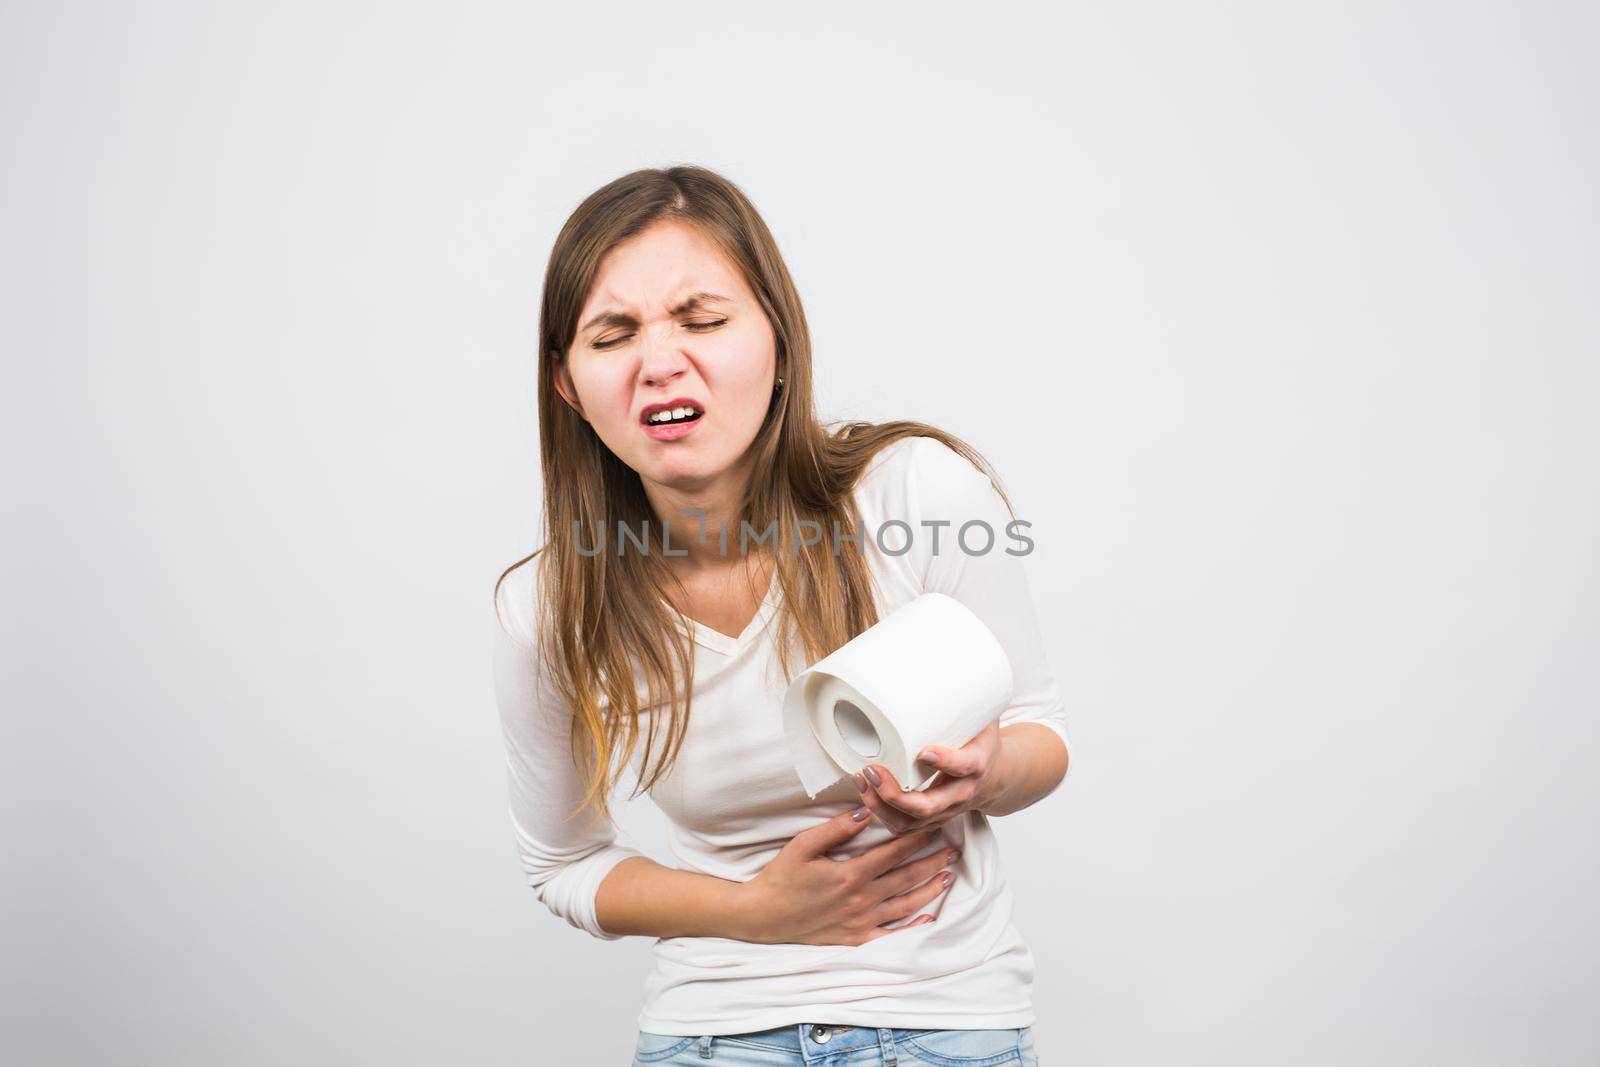 Sick woman with hands pressing her crotch lower abdomen, holding paper roll. Medical problems, incontinence, health care concept.